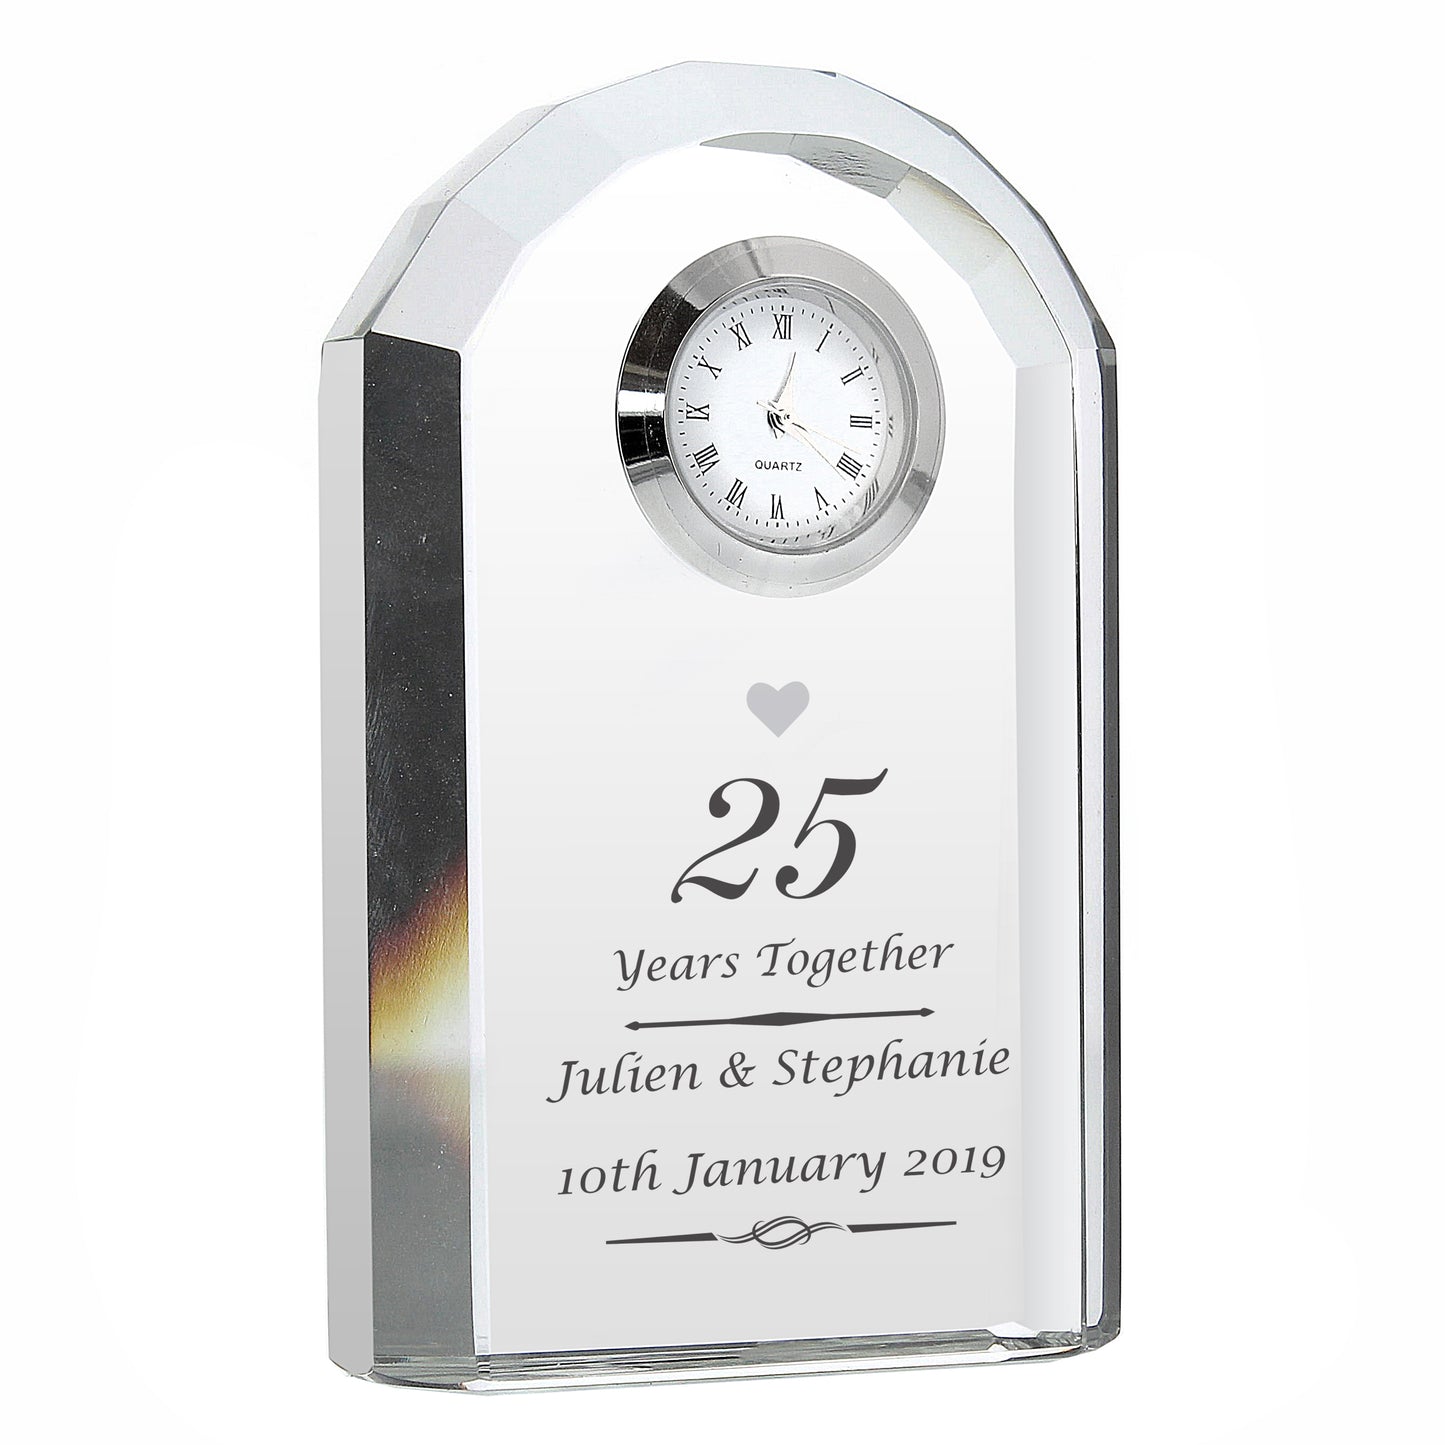 Personalised Silver Anniversary Crystal Clock - Personalise It!